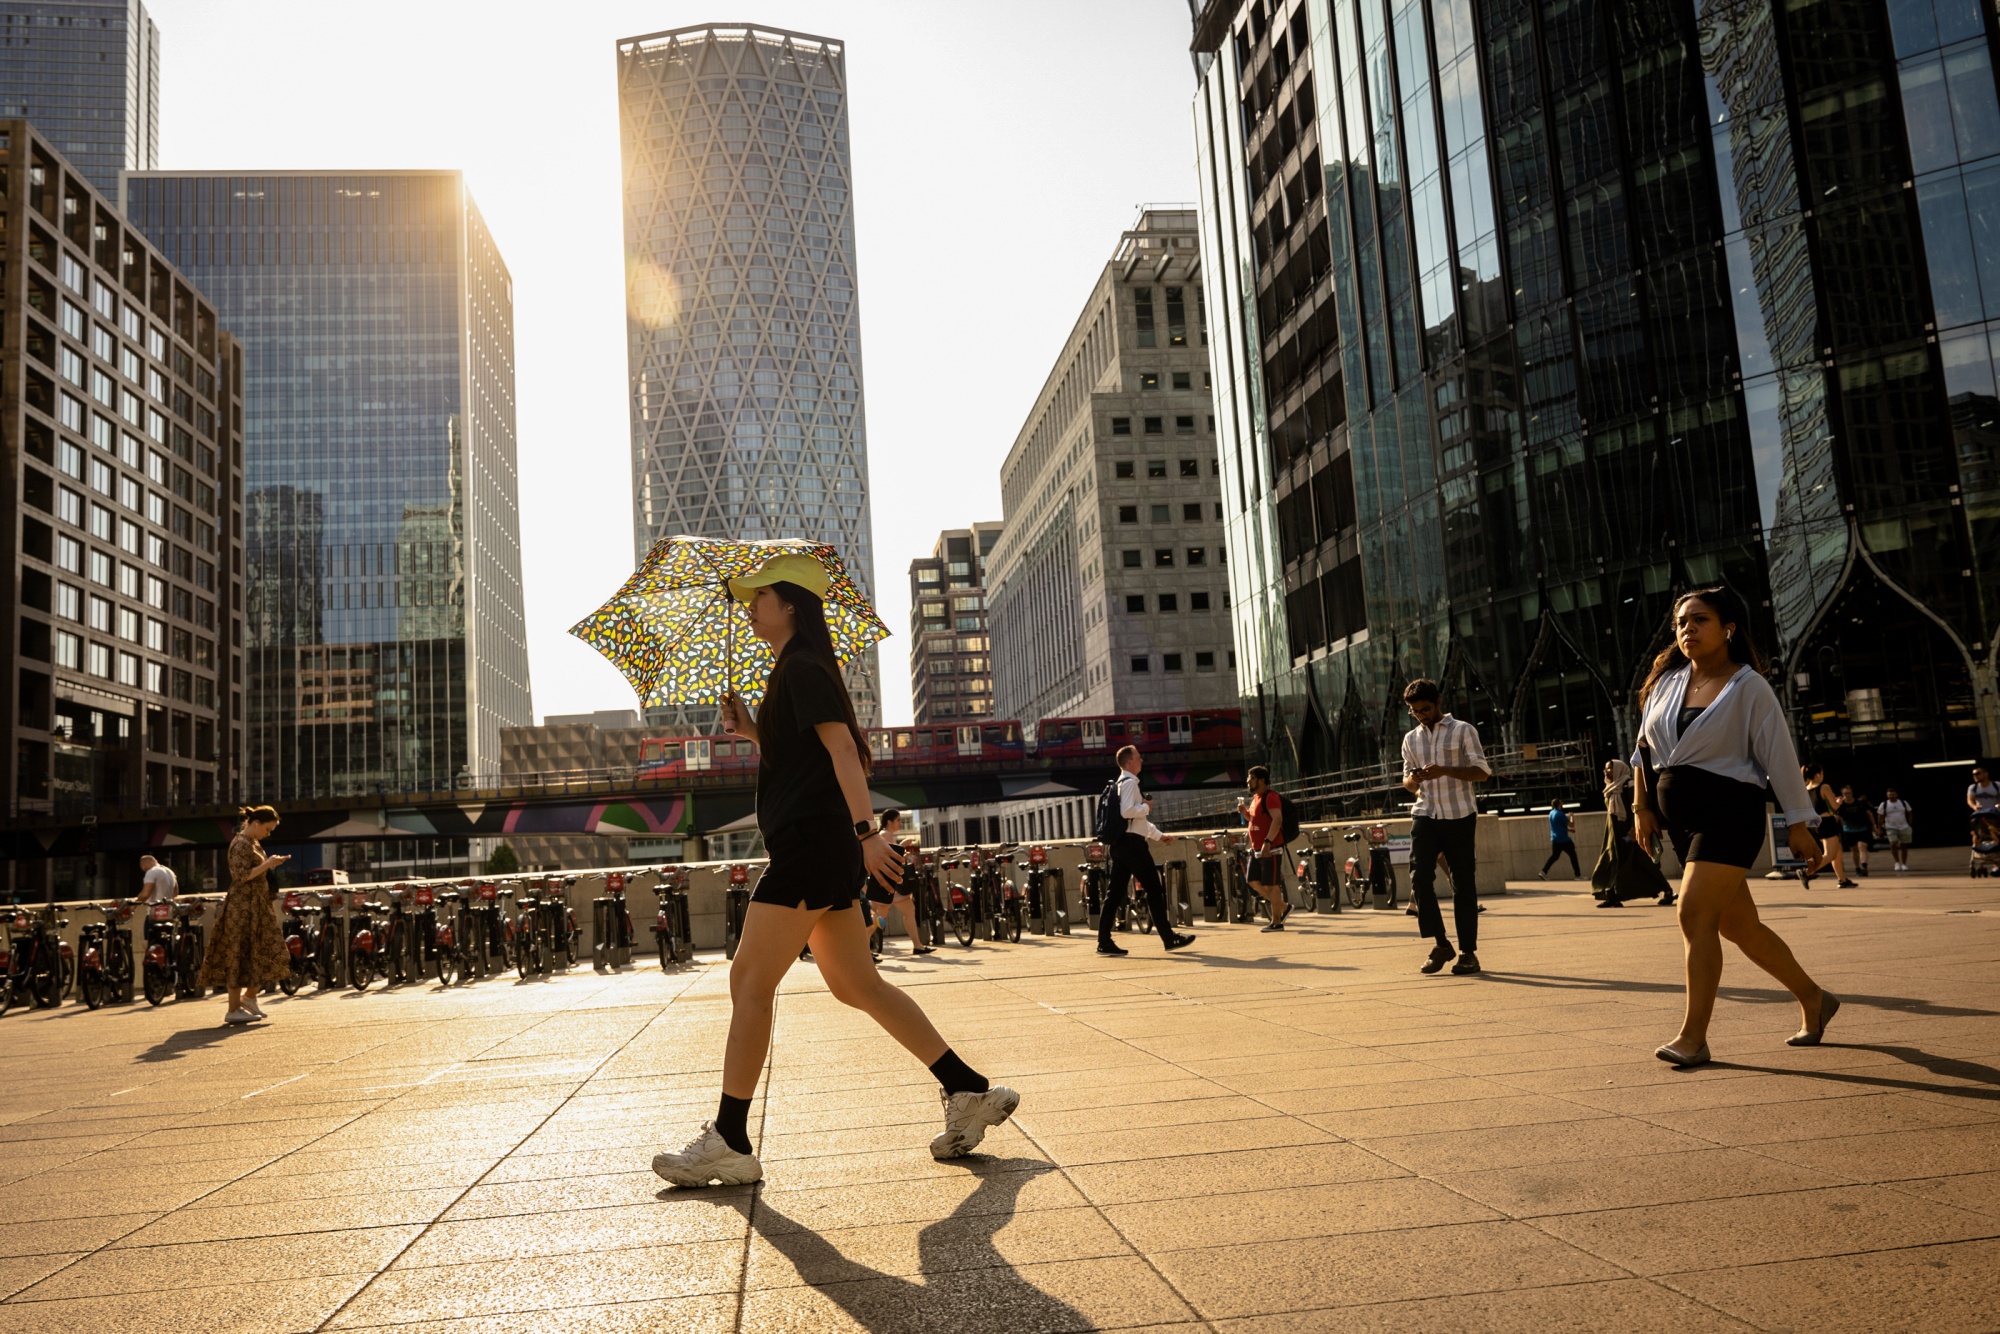 A pedestrian uses a umbrella to protect herself from the sun, at Canary Wharf, during a heatwave in London, on July 18.